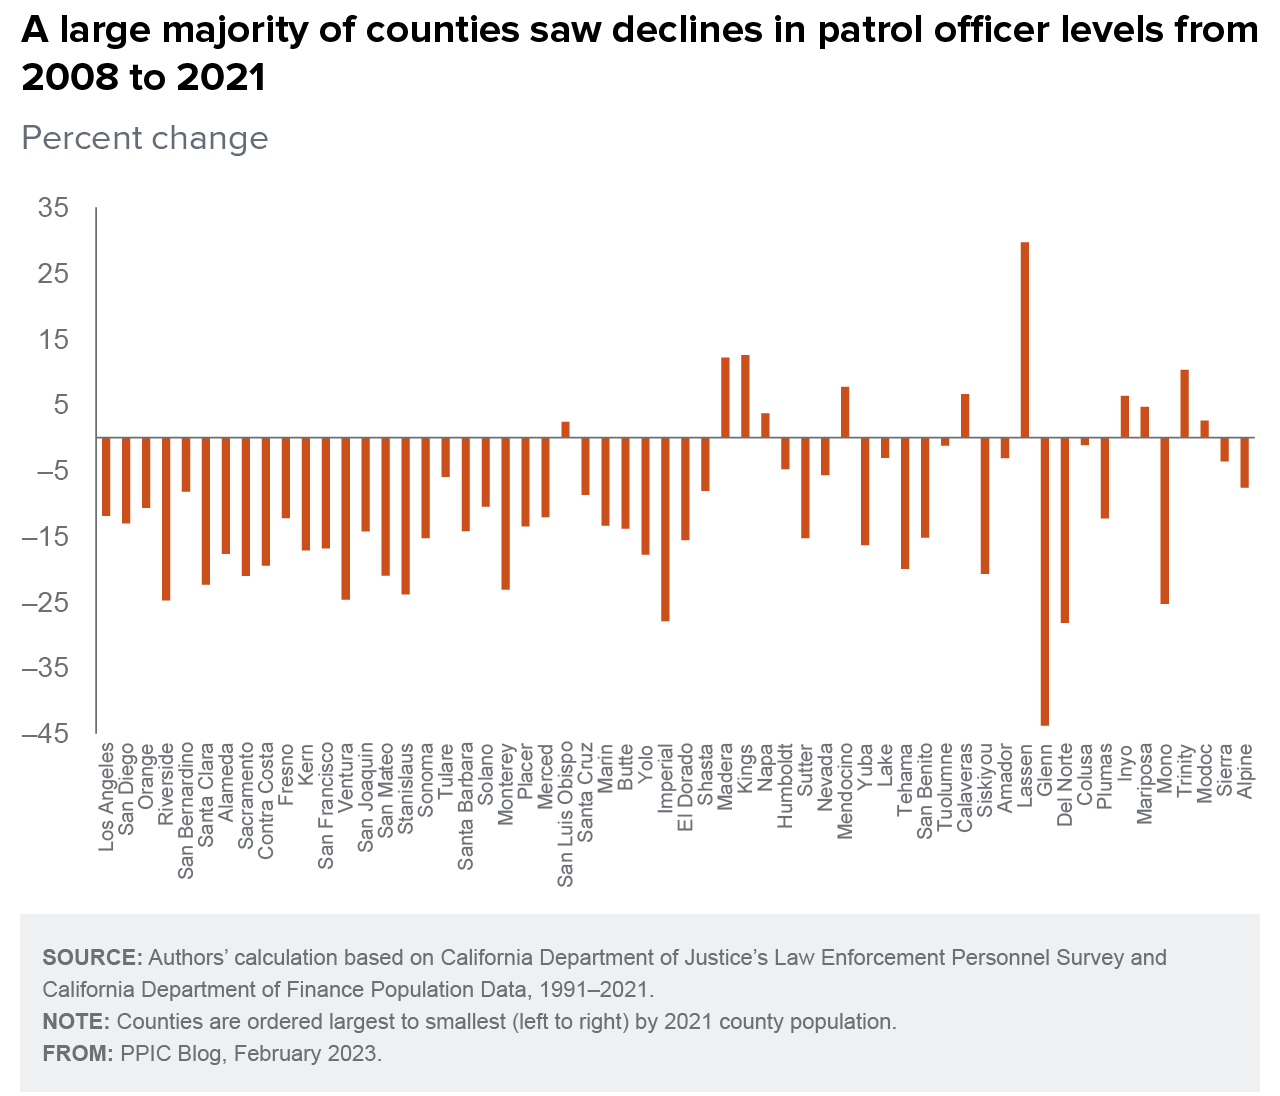 figure - A large majority of counties saw declines in patrol officer levels from 2008 to 2021